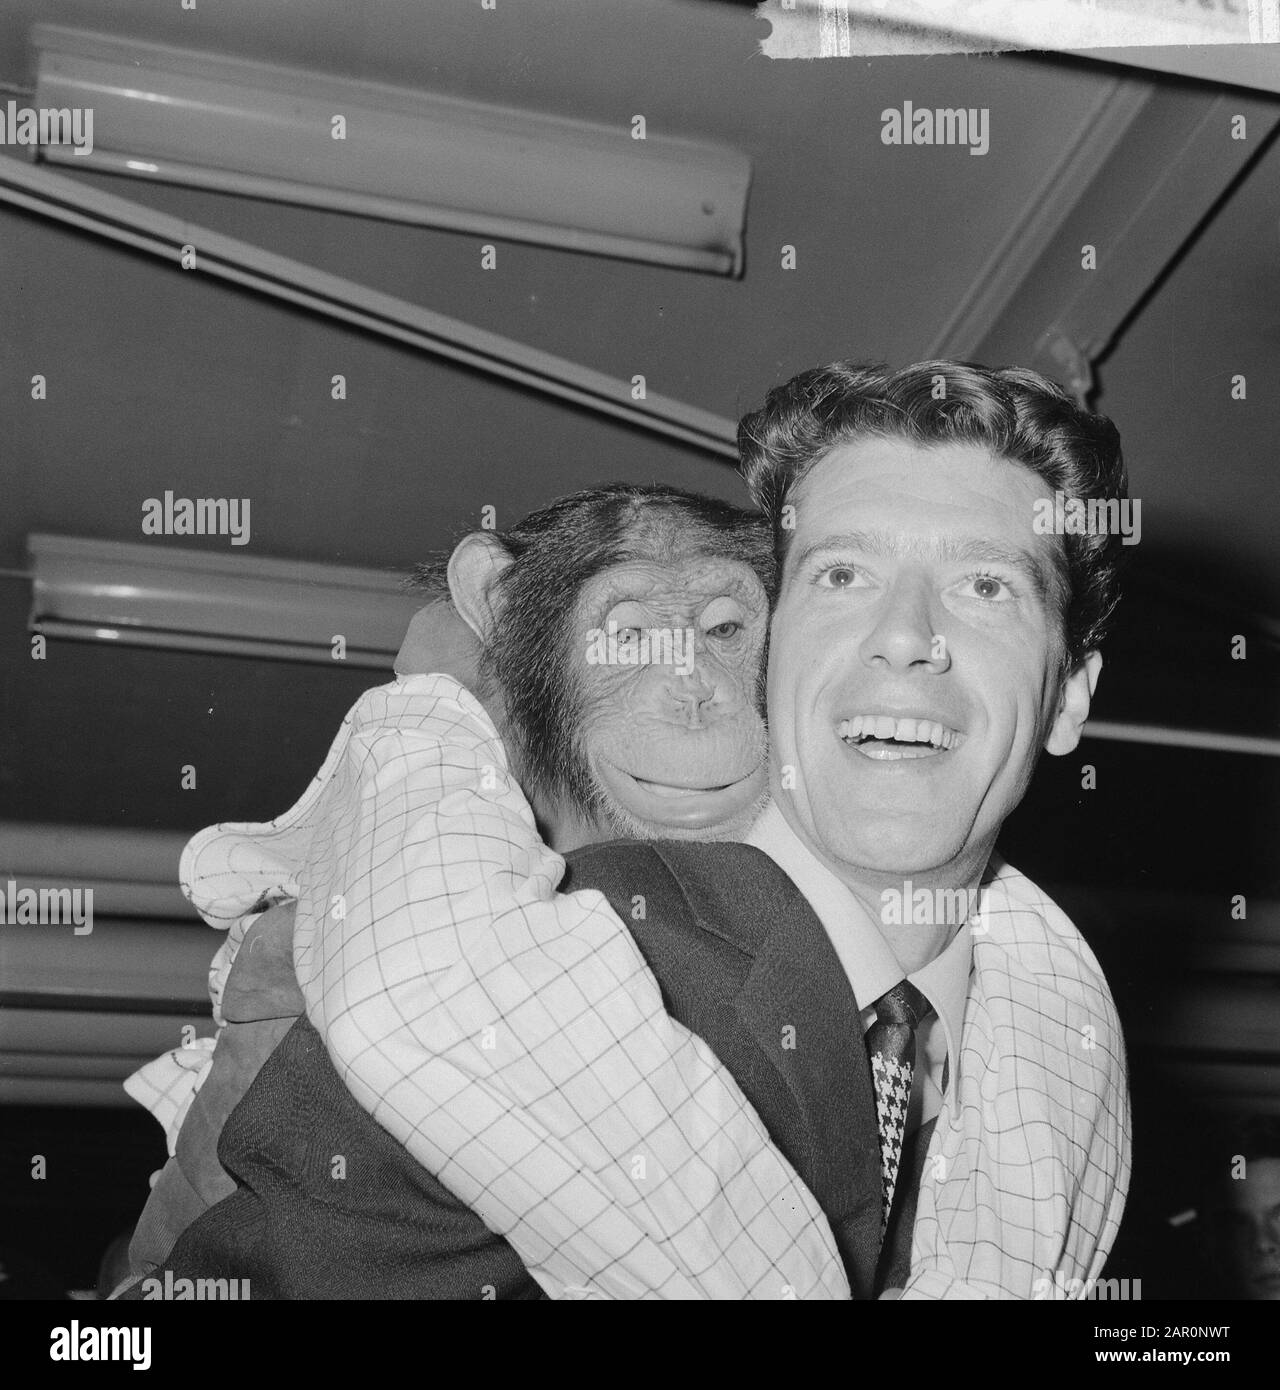 Rudi Carrell won the silver rose. Rudi Carrell with chimpanzee Plato playing in his show Date: 25 april 1964 Location: Noord-Holland, Schiphol Keywords: arrivals, chimpanzees Personal name: Carrell, Rudi Institutioningsname: Silver Rose Stock Photo